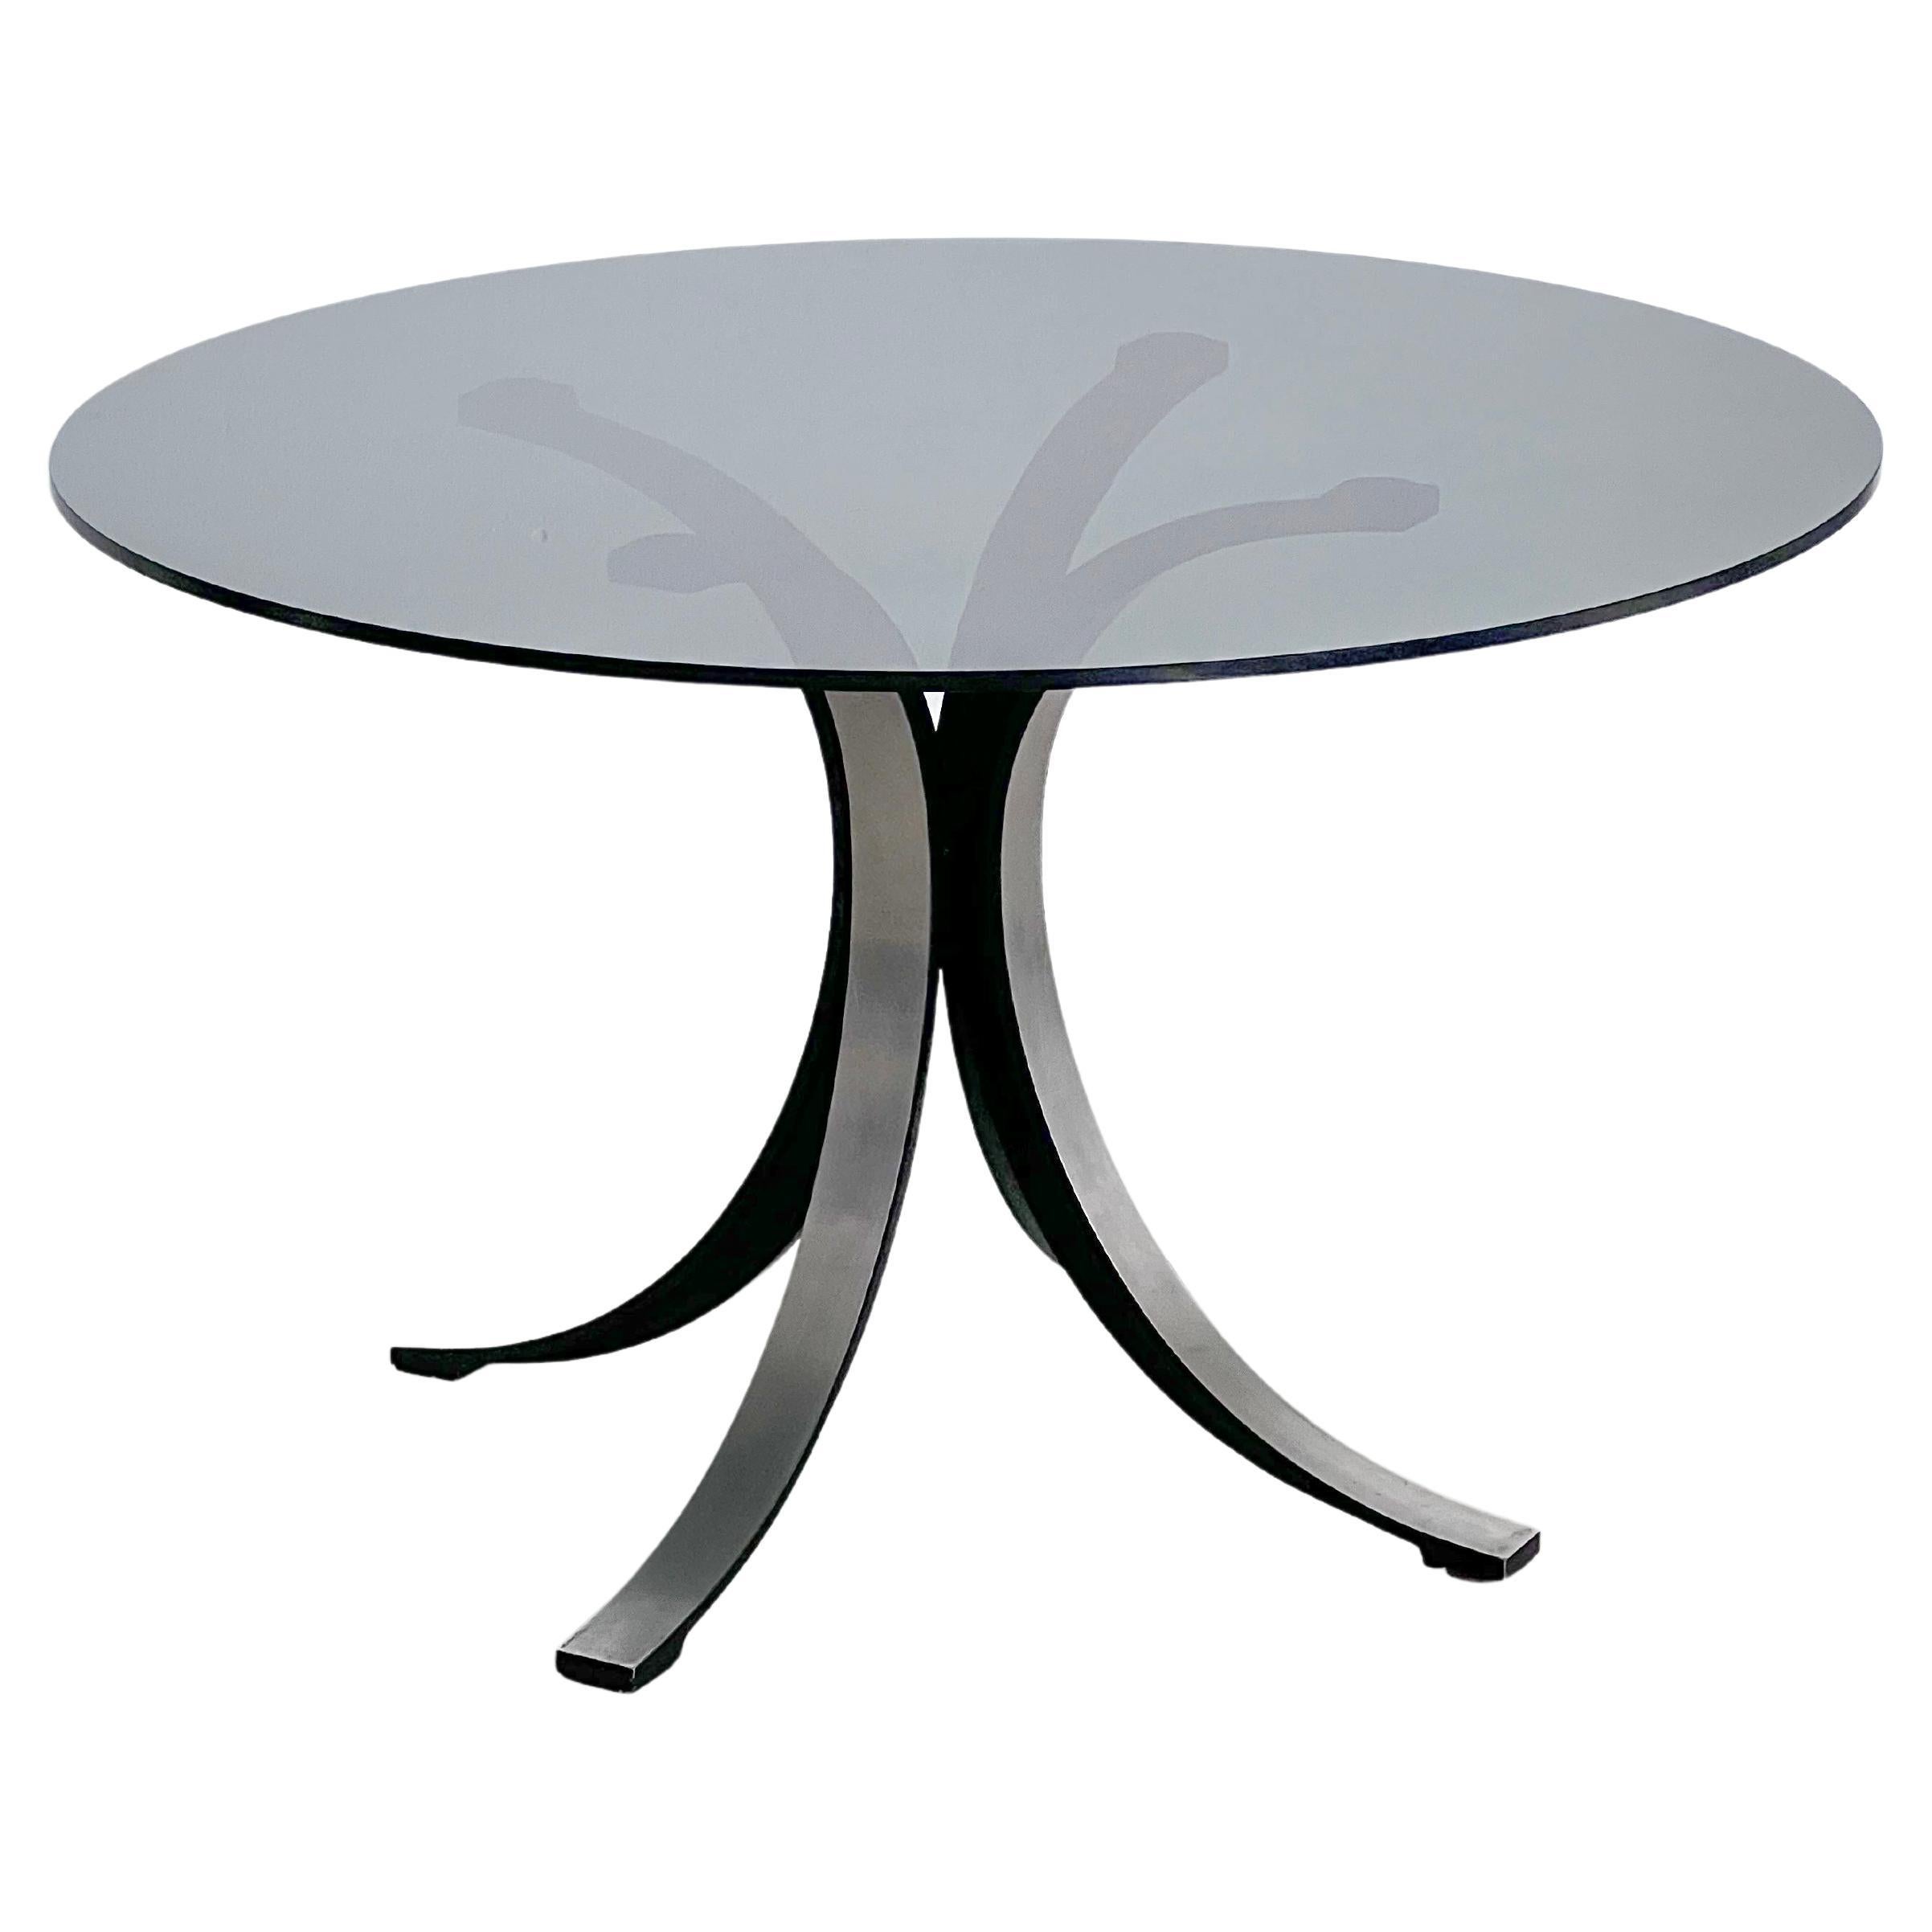 Vintage Italian Mid Century Modern Dining Table in Aluminium, Smoked Glass Top For Sale